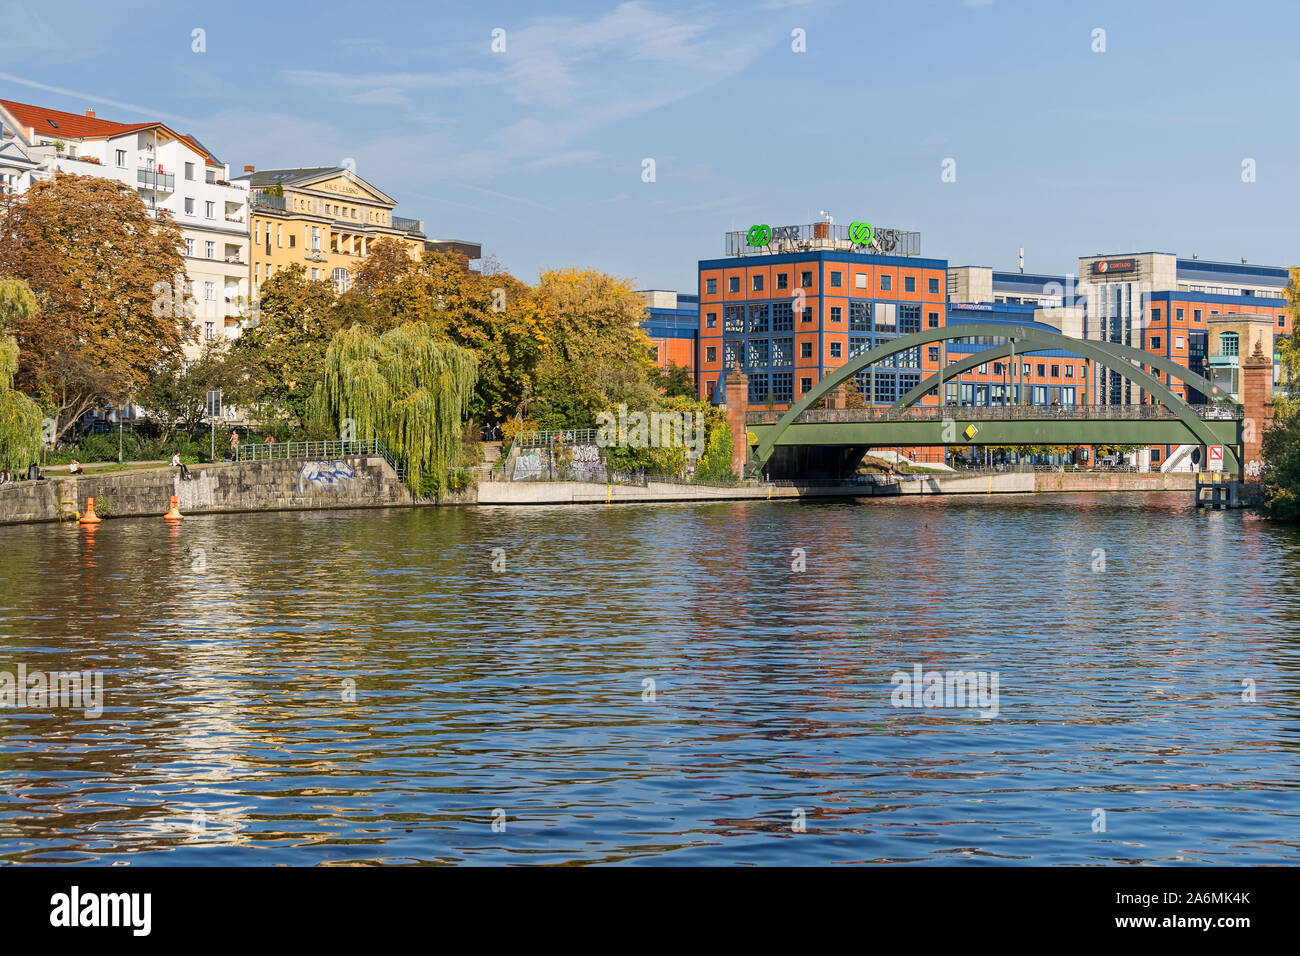 Berlin, Germany - October 14, 2019: Banks of the river Spree Bundesratufer in a district Westphalian quarter with the Lessing bridge, buildings of the Stock Photo